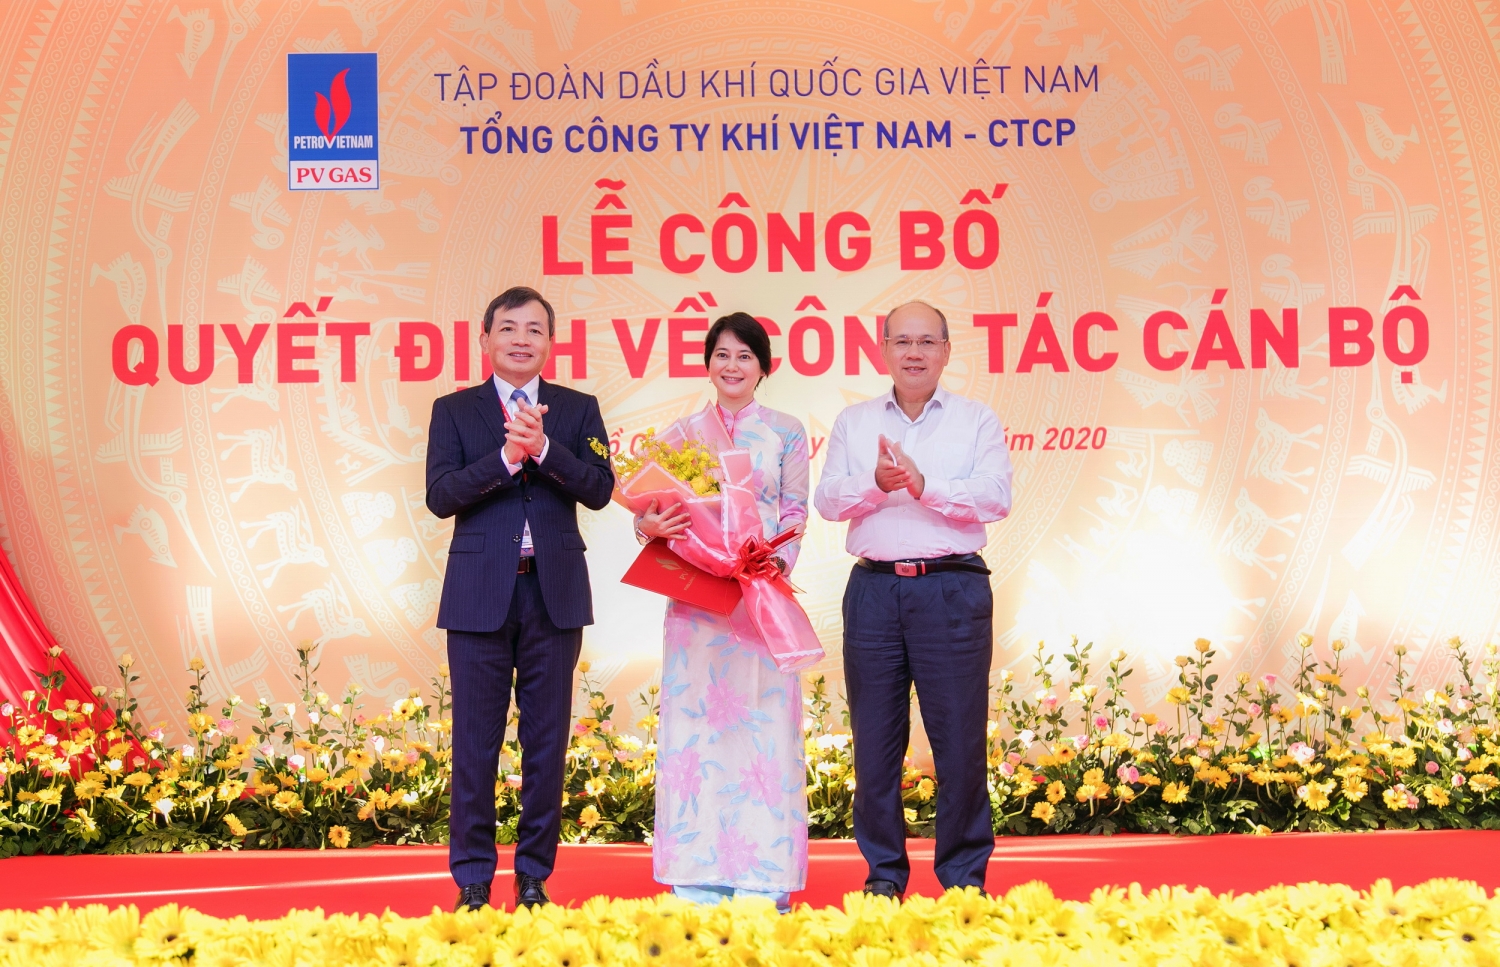 pv gas to chuc le cong bo quyet dinh ve cong tac can bo